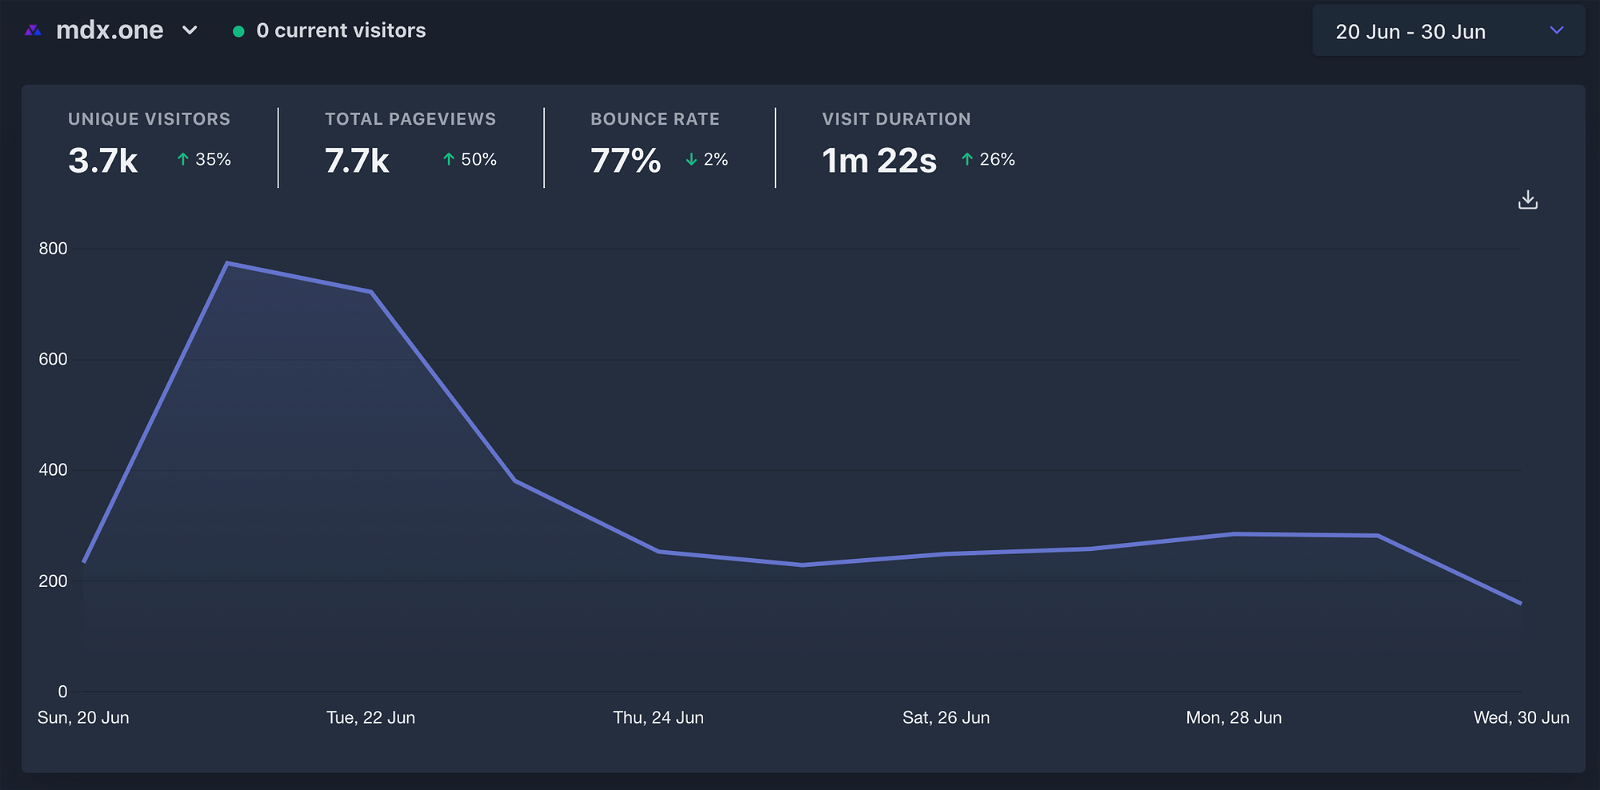 June analytics since the launch on 21st June.